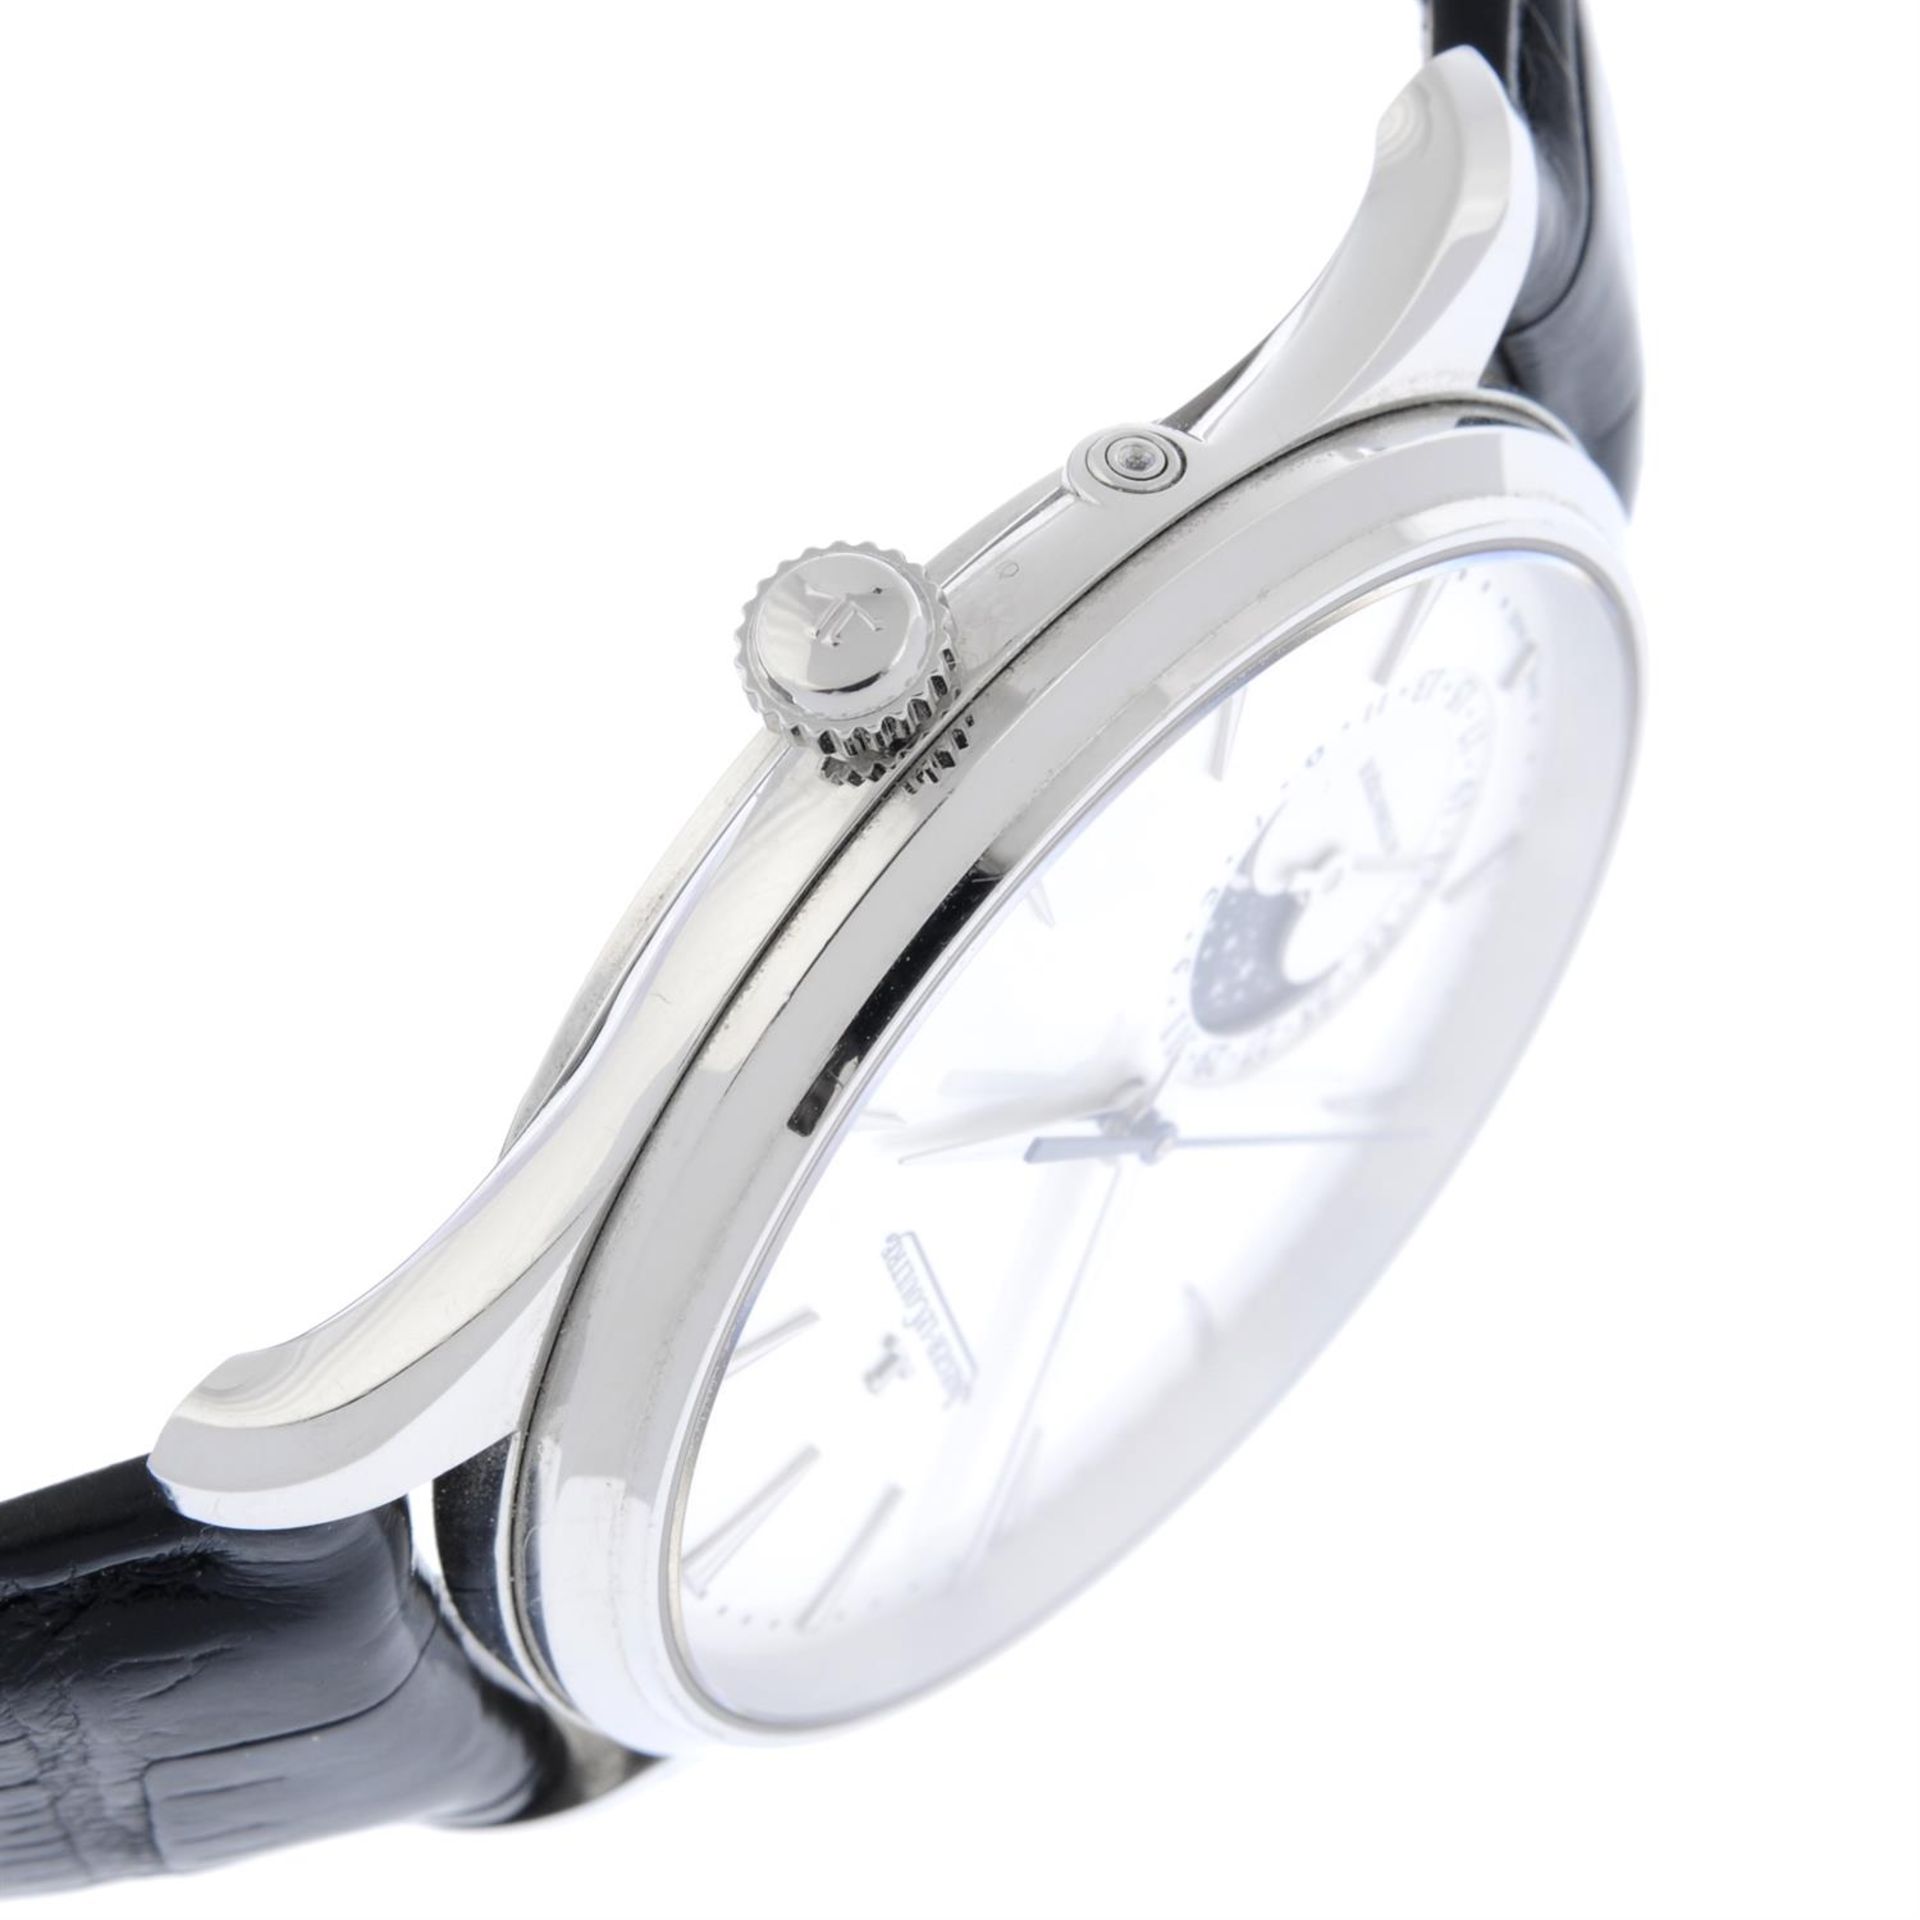 JAEGER-LECOULTRE - a stainless steel Master Ultra-Thin Moonphase wrist watch, 38mm. - Image 3 of 5